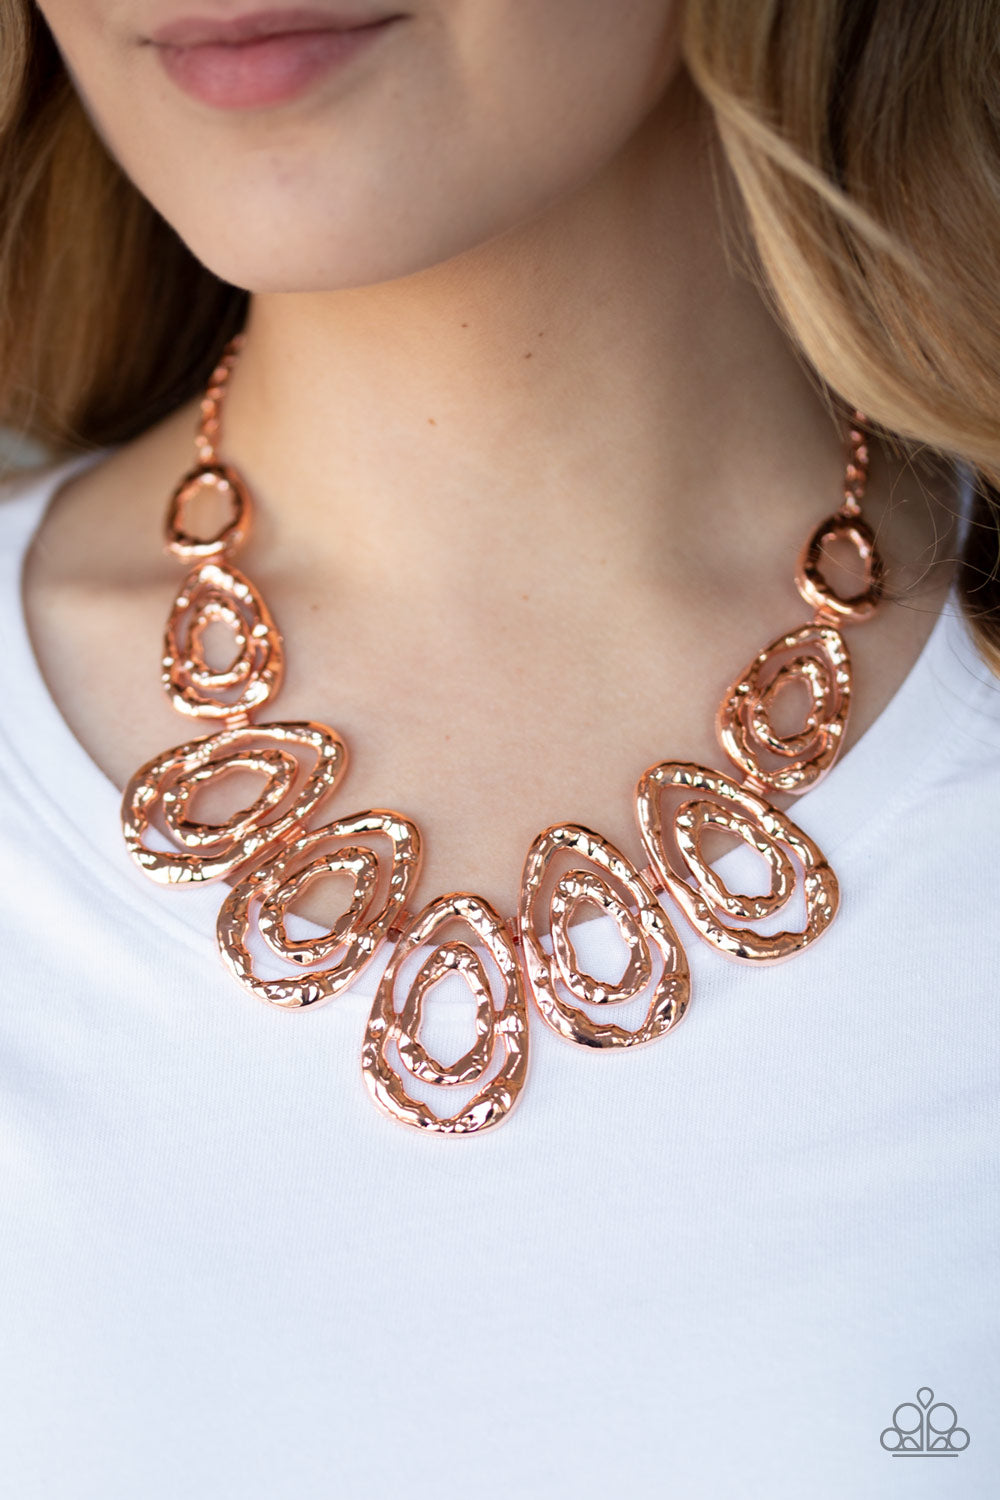 Paparazzi DRAWN to the Wind Copper Necklace & Earring Set